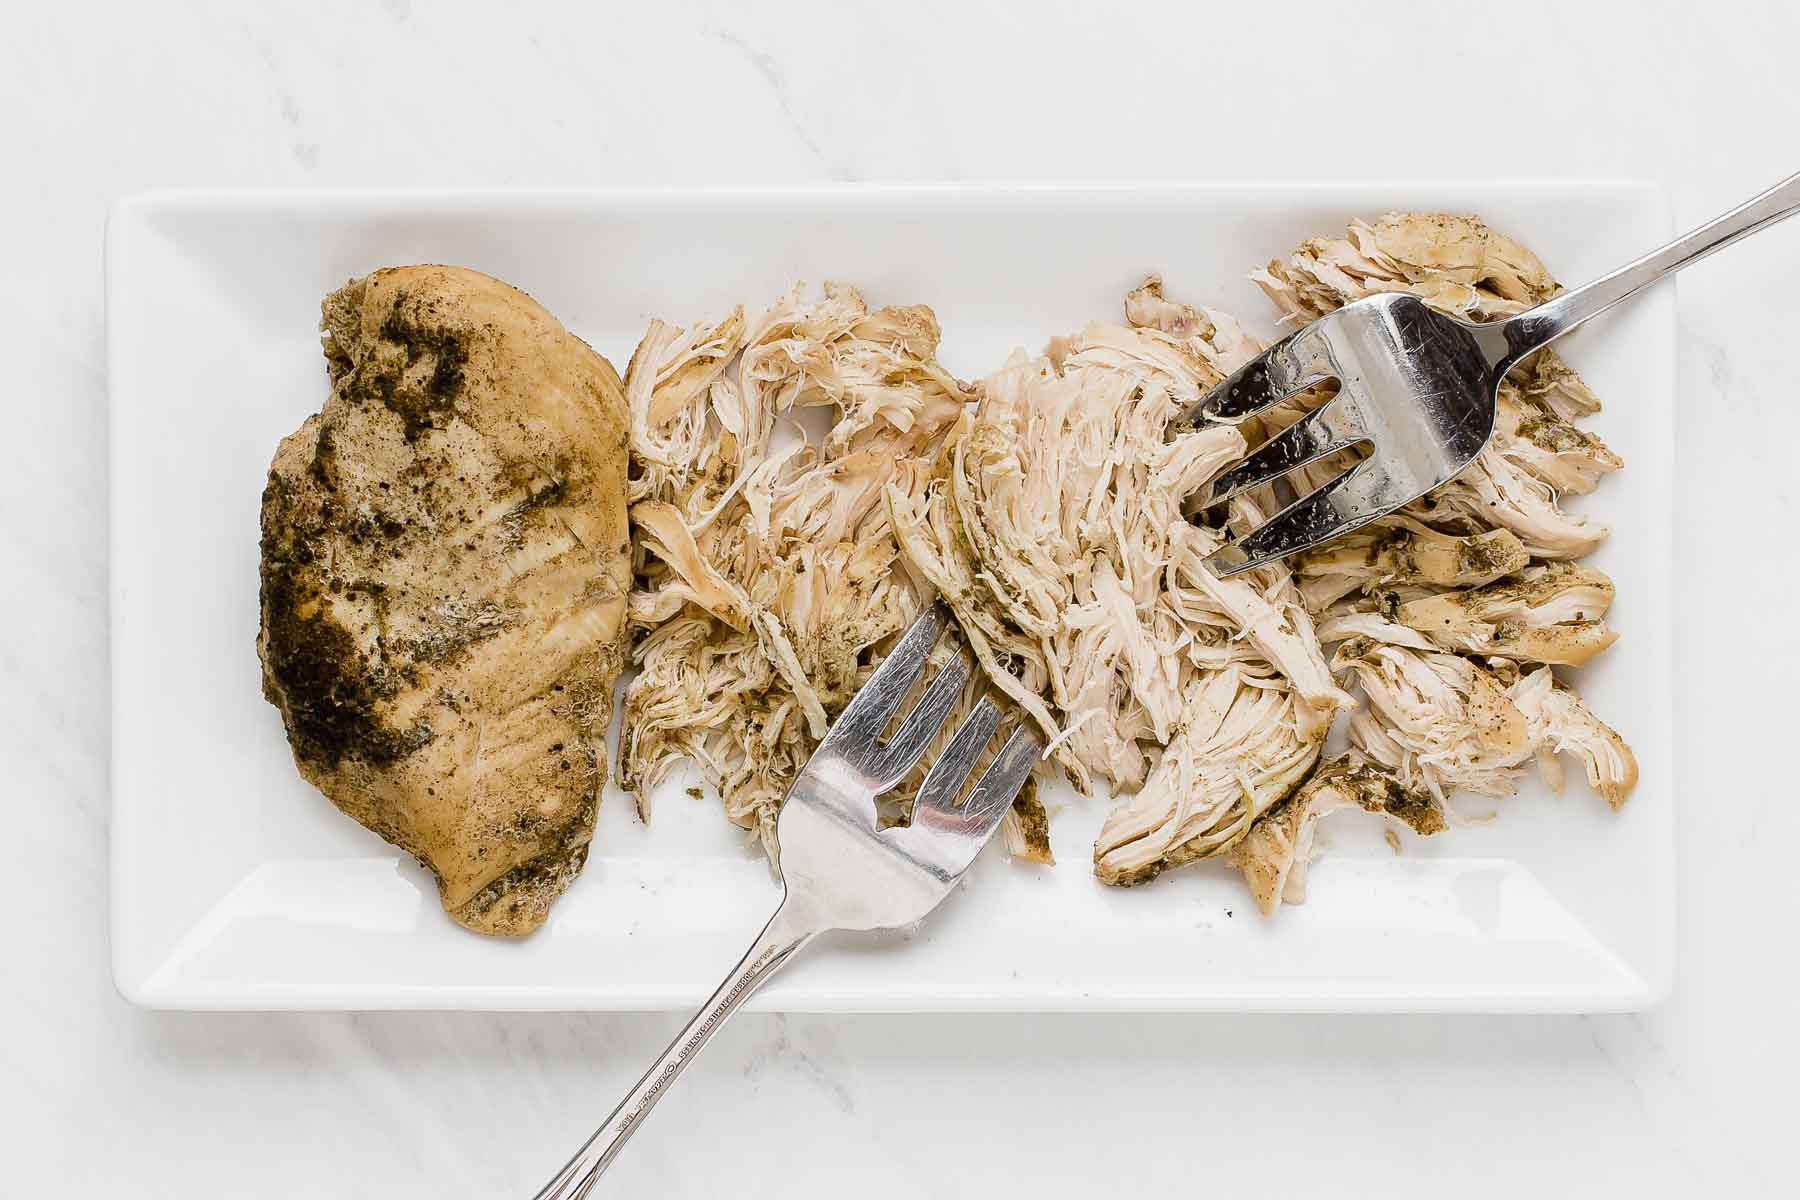 Shredding chicken with two forks from crockpot.